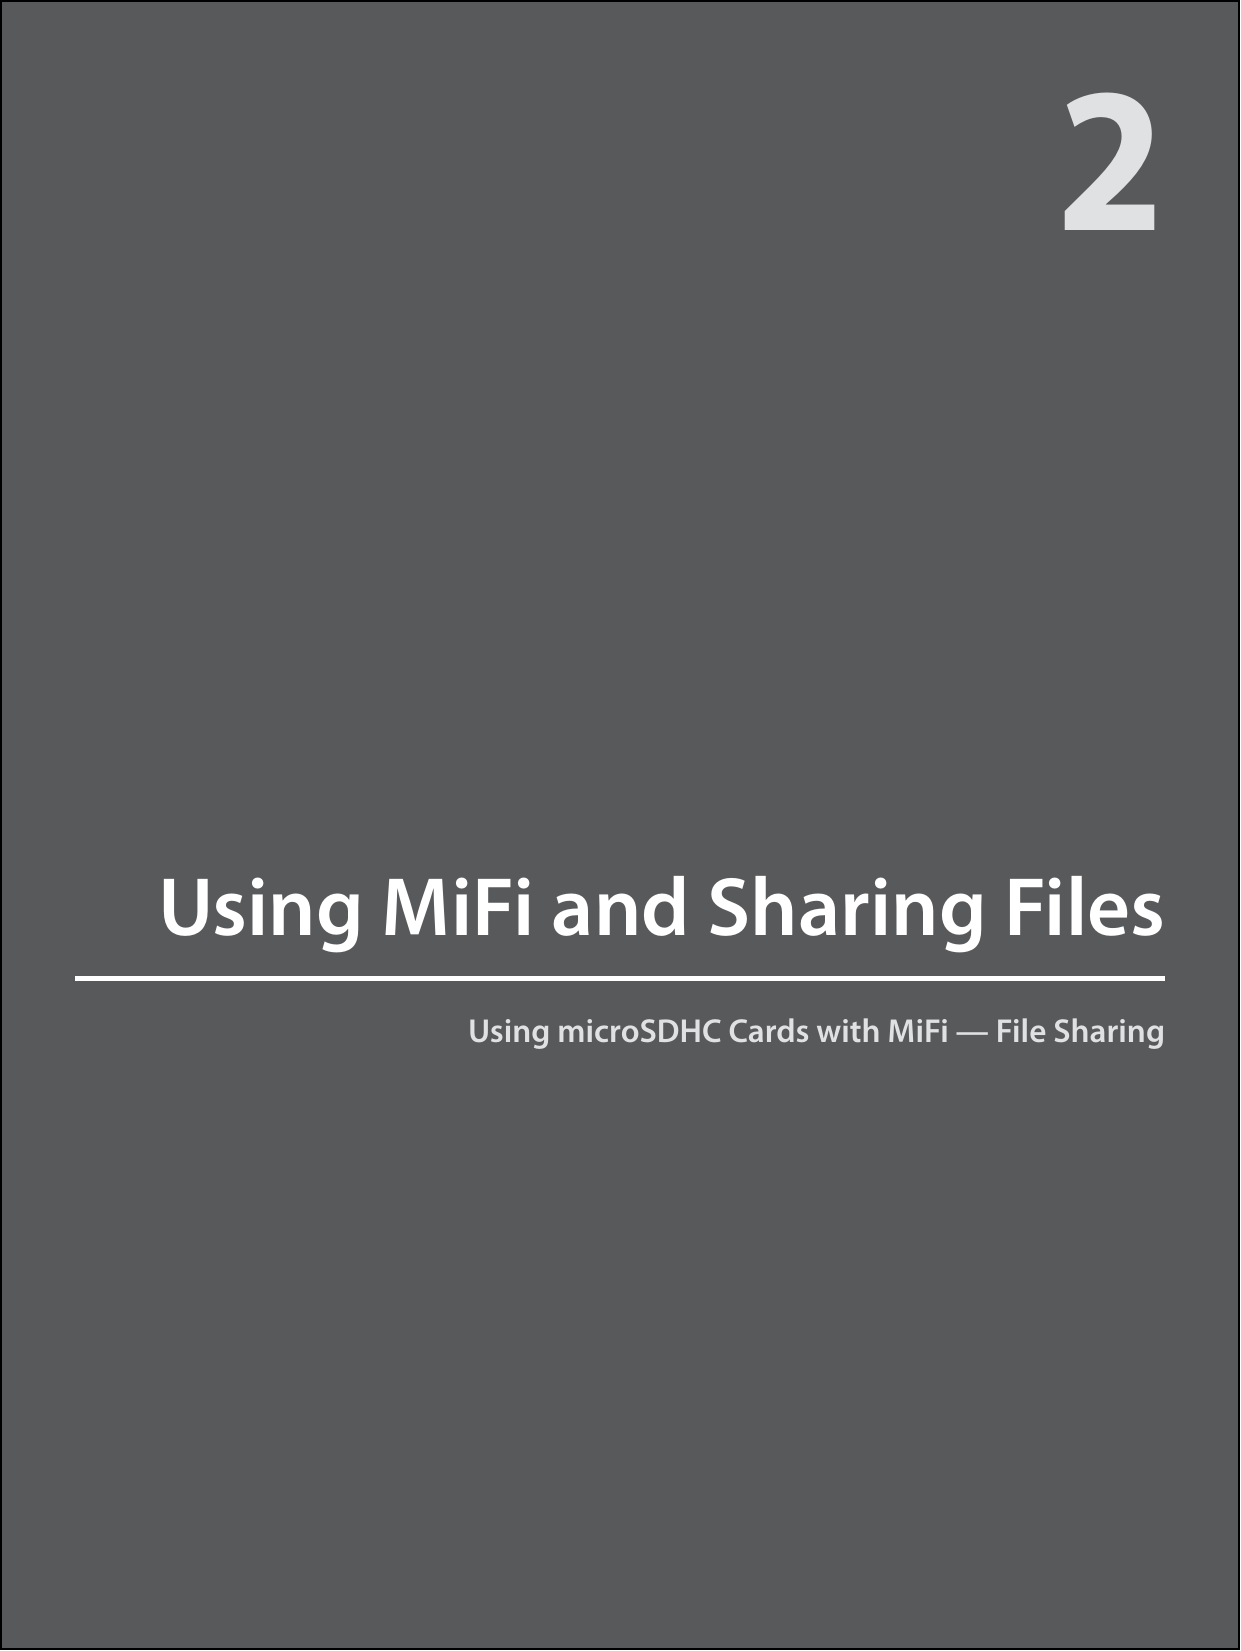 Using microSDHC Cards with MiFi   — File SharingUsing MiFi and Sharing Files2